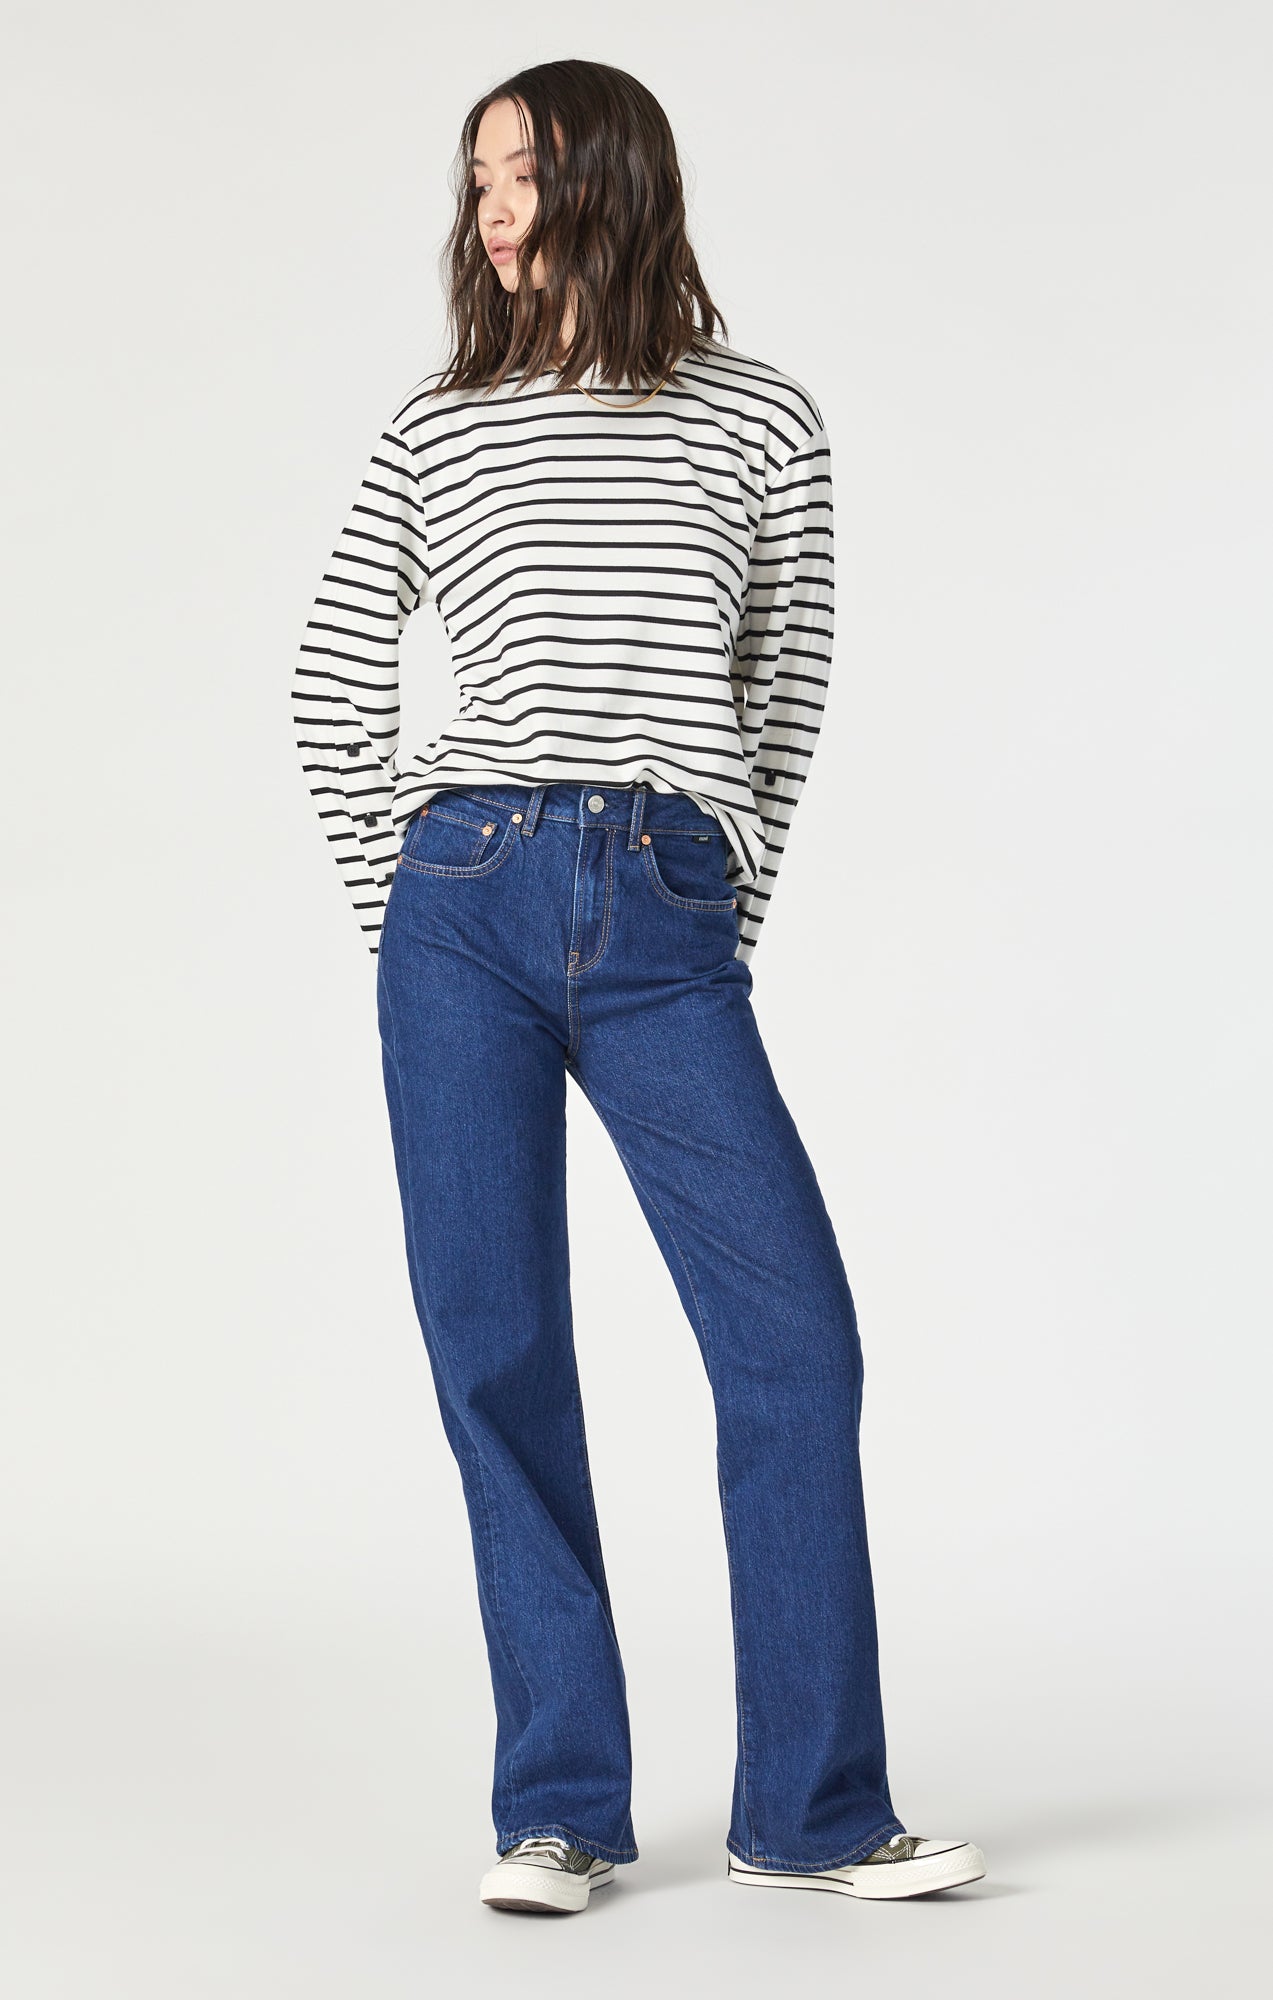 Blue Tall Women Flared Jeans in Sizes 0/2-22 and Up to 39.5 Inseam